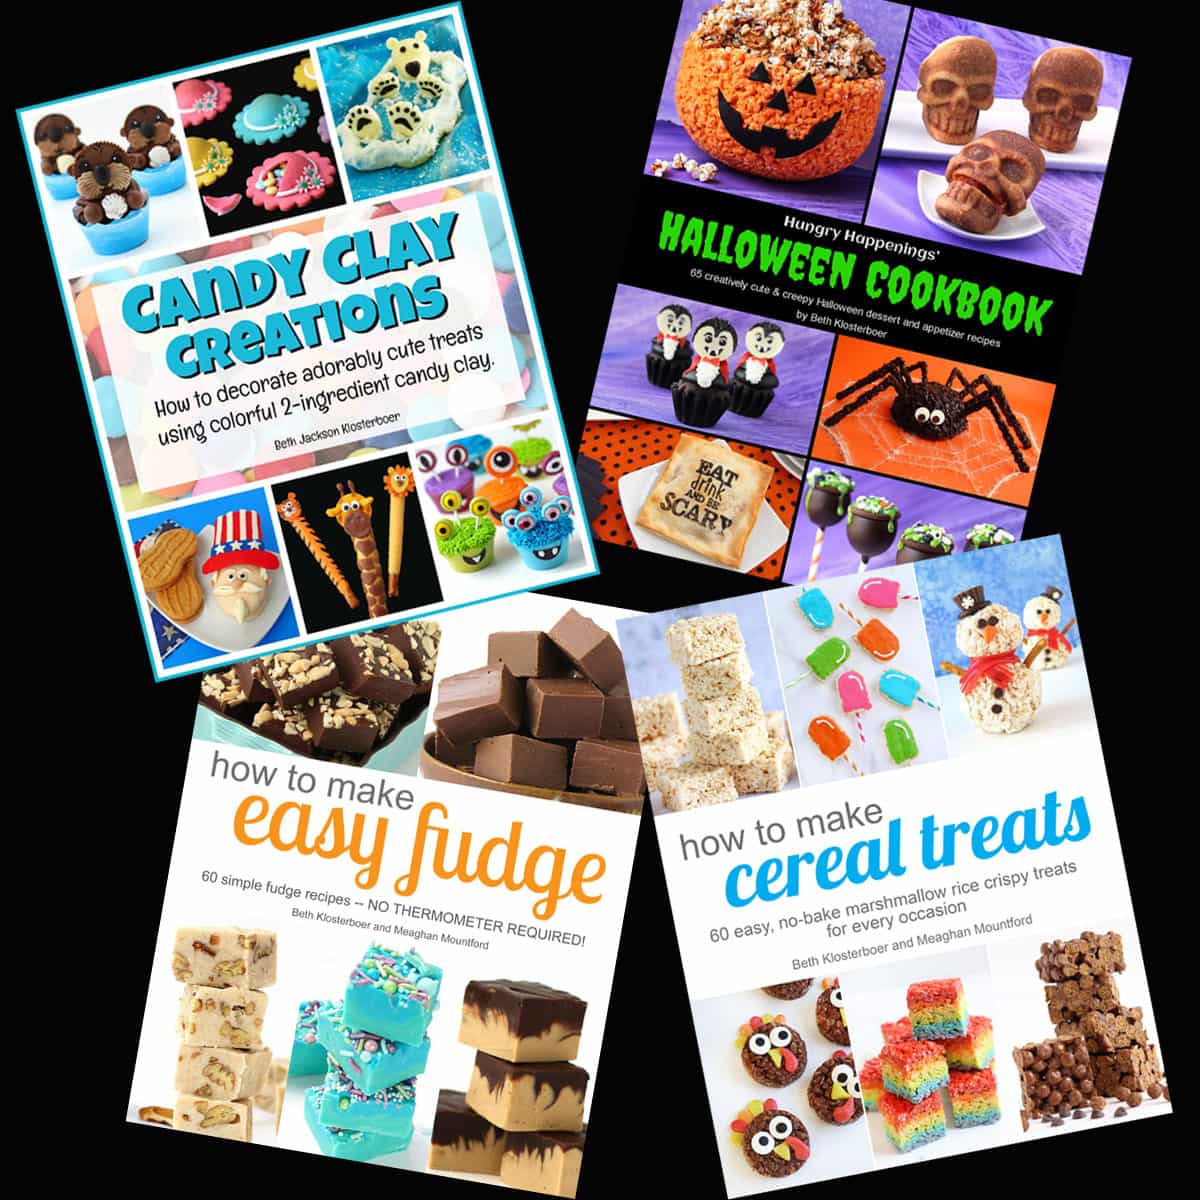 Cookbooks - Candy Clay Creations, Hungry Happenings' Halloween Cookbook, How To Make Easy Fudge, and How To Make Cereal Treats